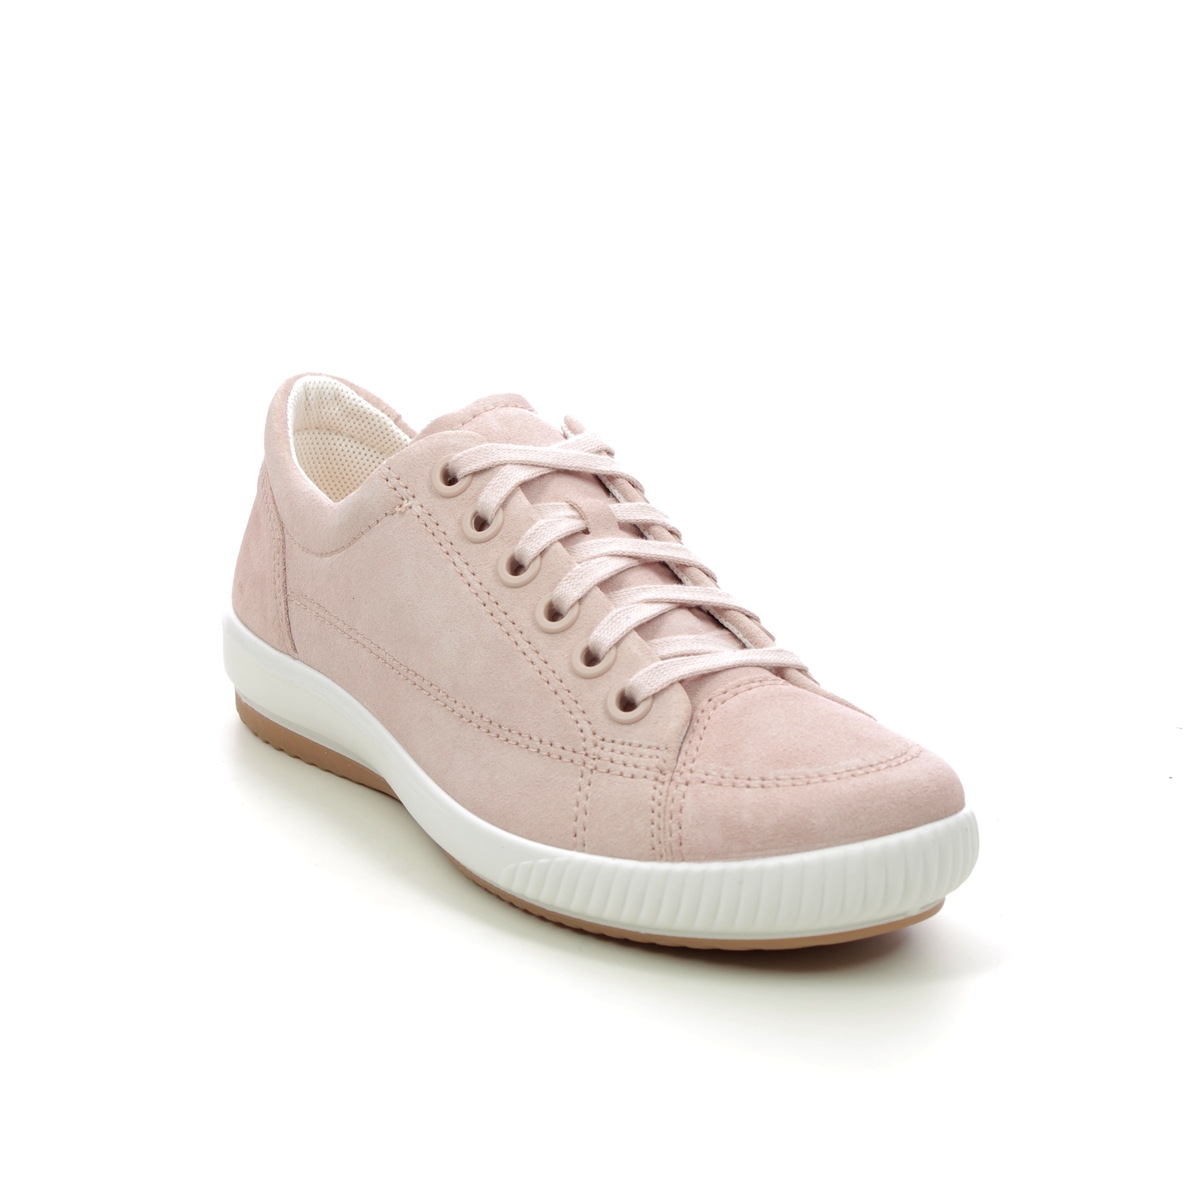 Legero Tanaro 5 Stitch Blush Pink Womens lacing shoes 2000161-4560 in a Plain Leather in Size 7